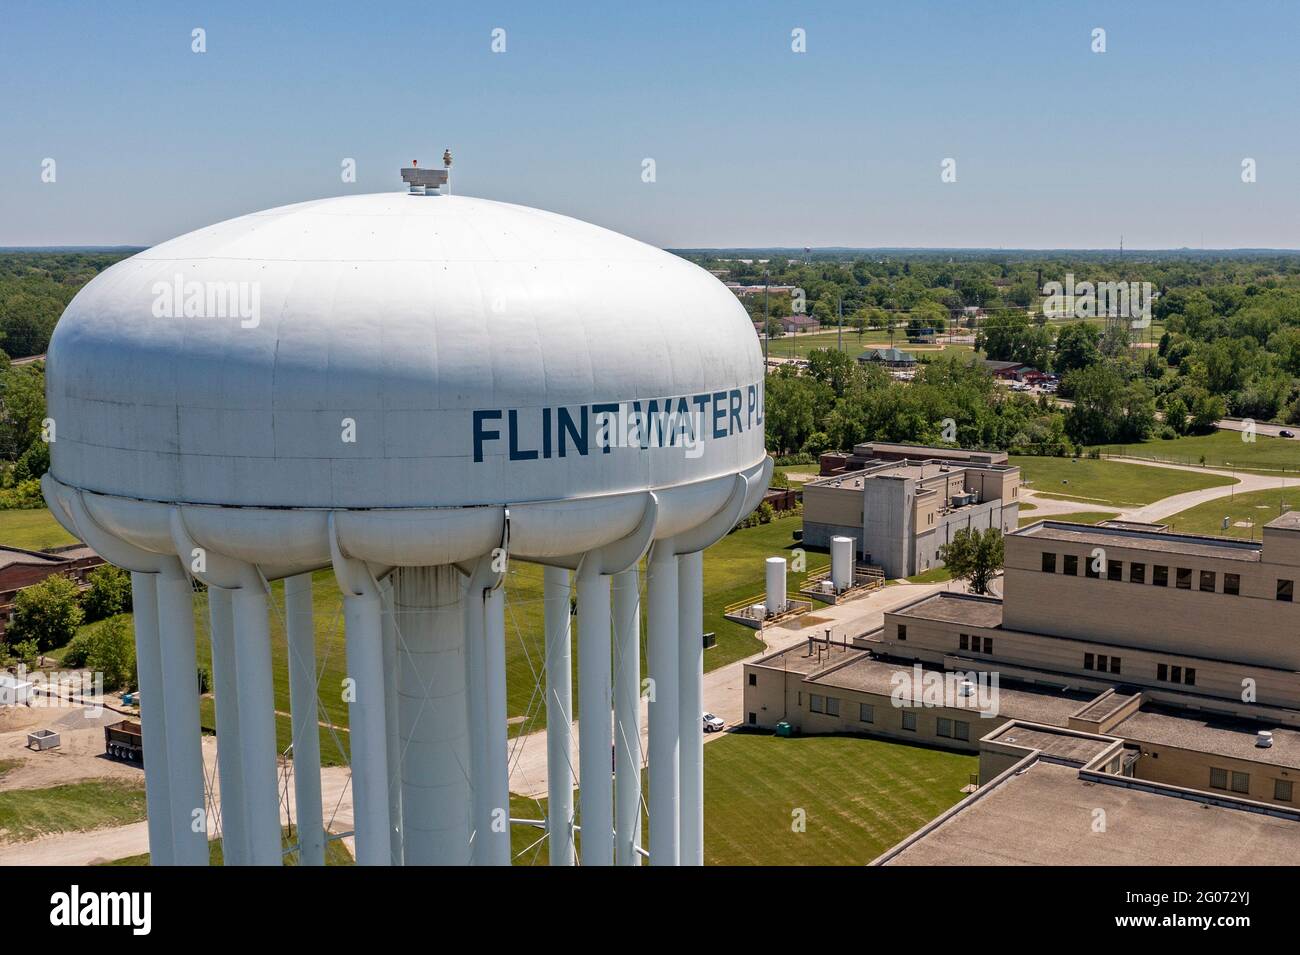 Flint, Michigan - The Flint Water Plant. Thousands of children were exposed to harmful concentrations of lead after the city's water supply was contam Stock Photo